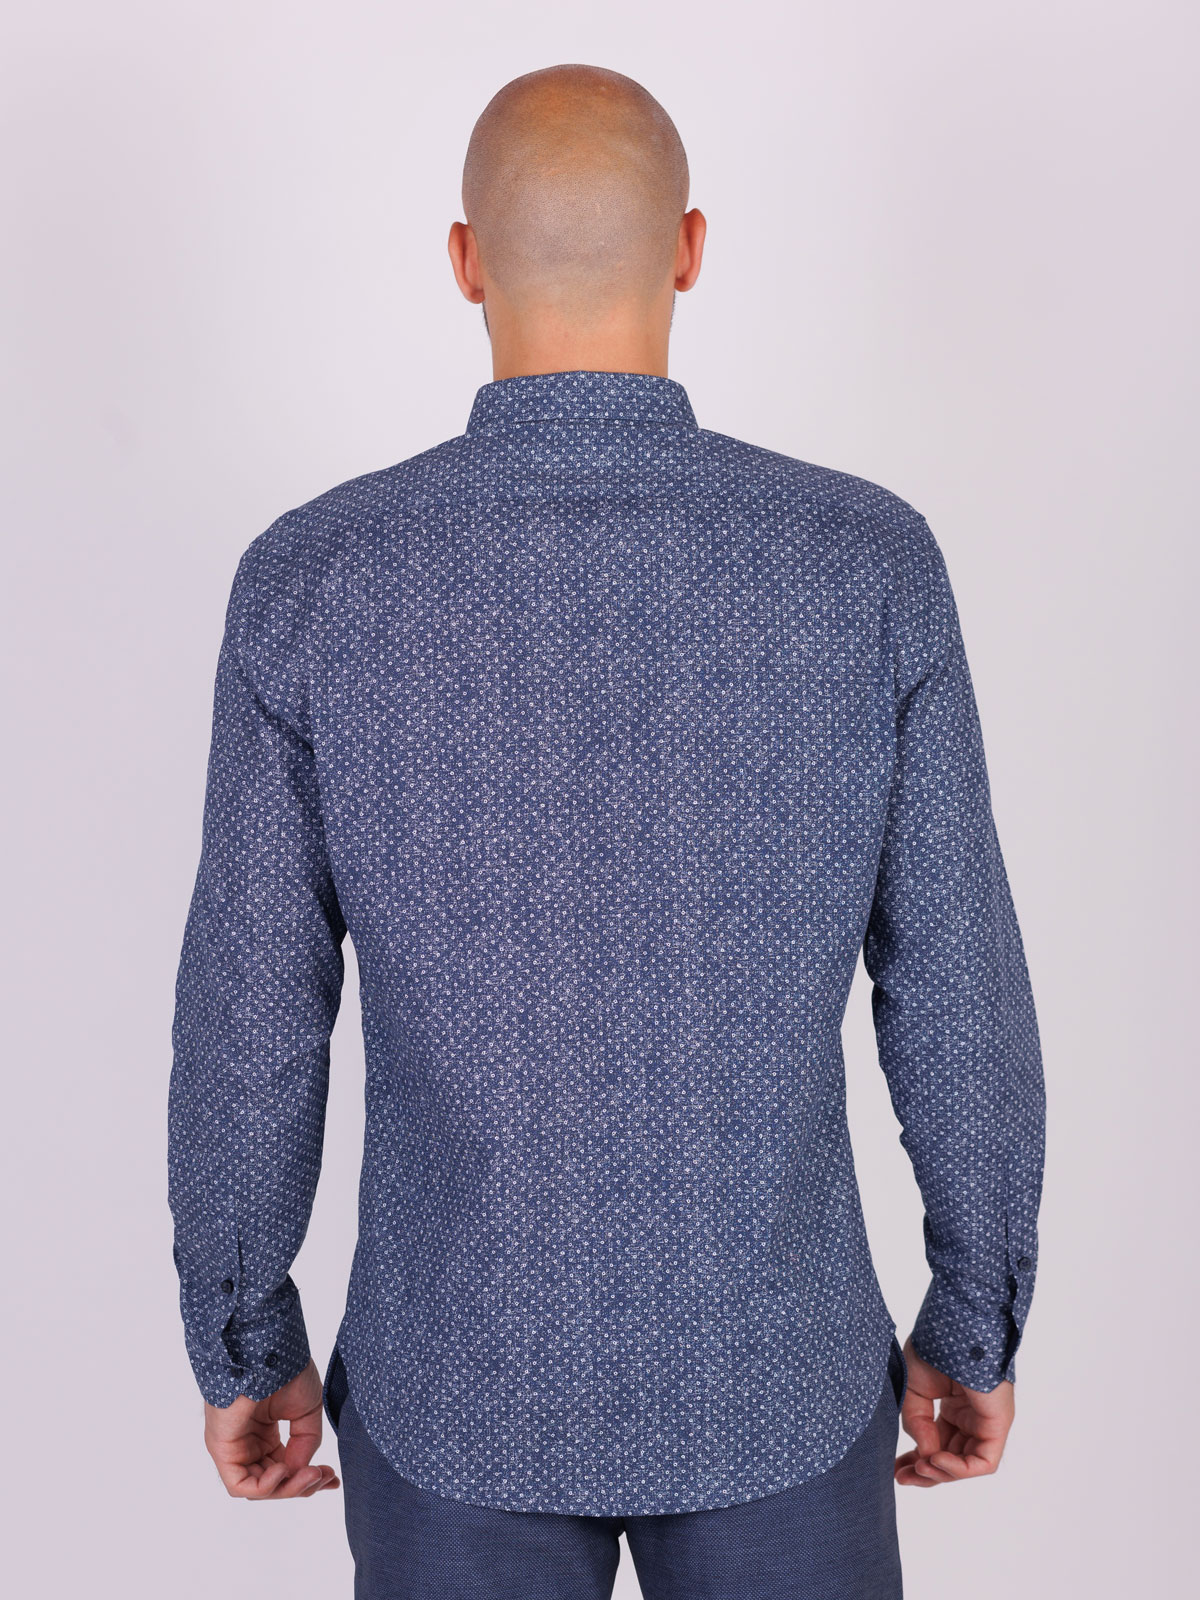 Mens shirt with floral patterns - 21573 € 44.43 img2